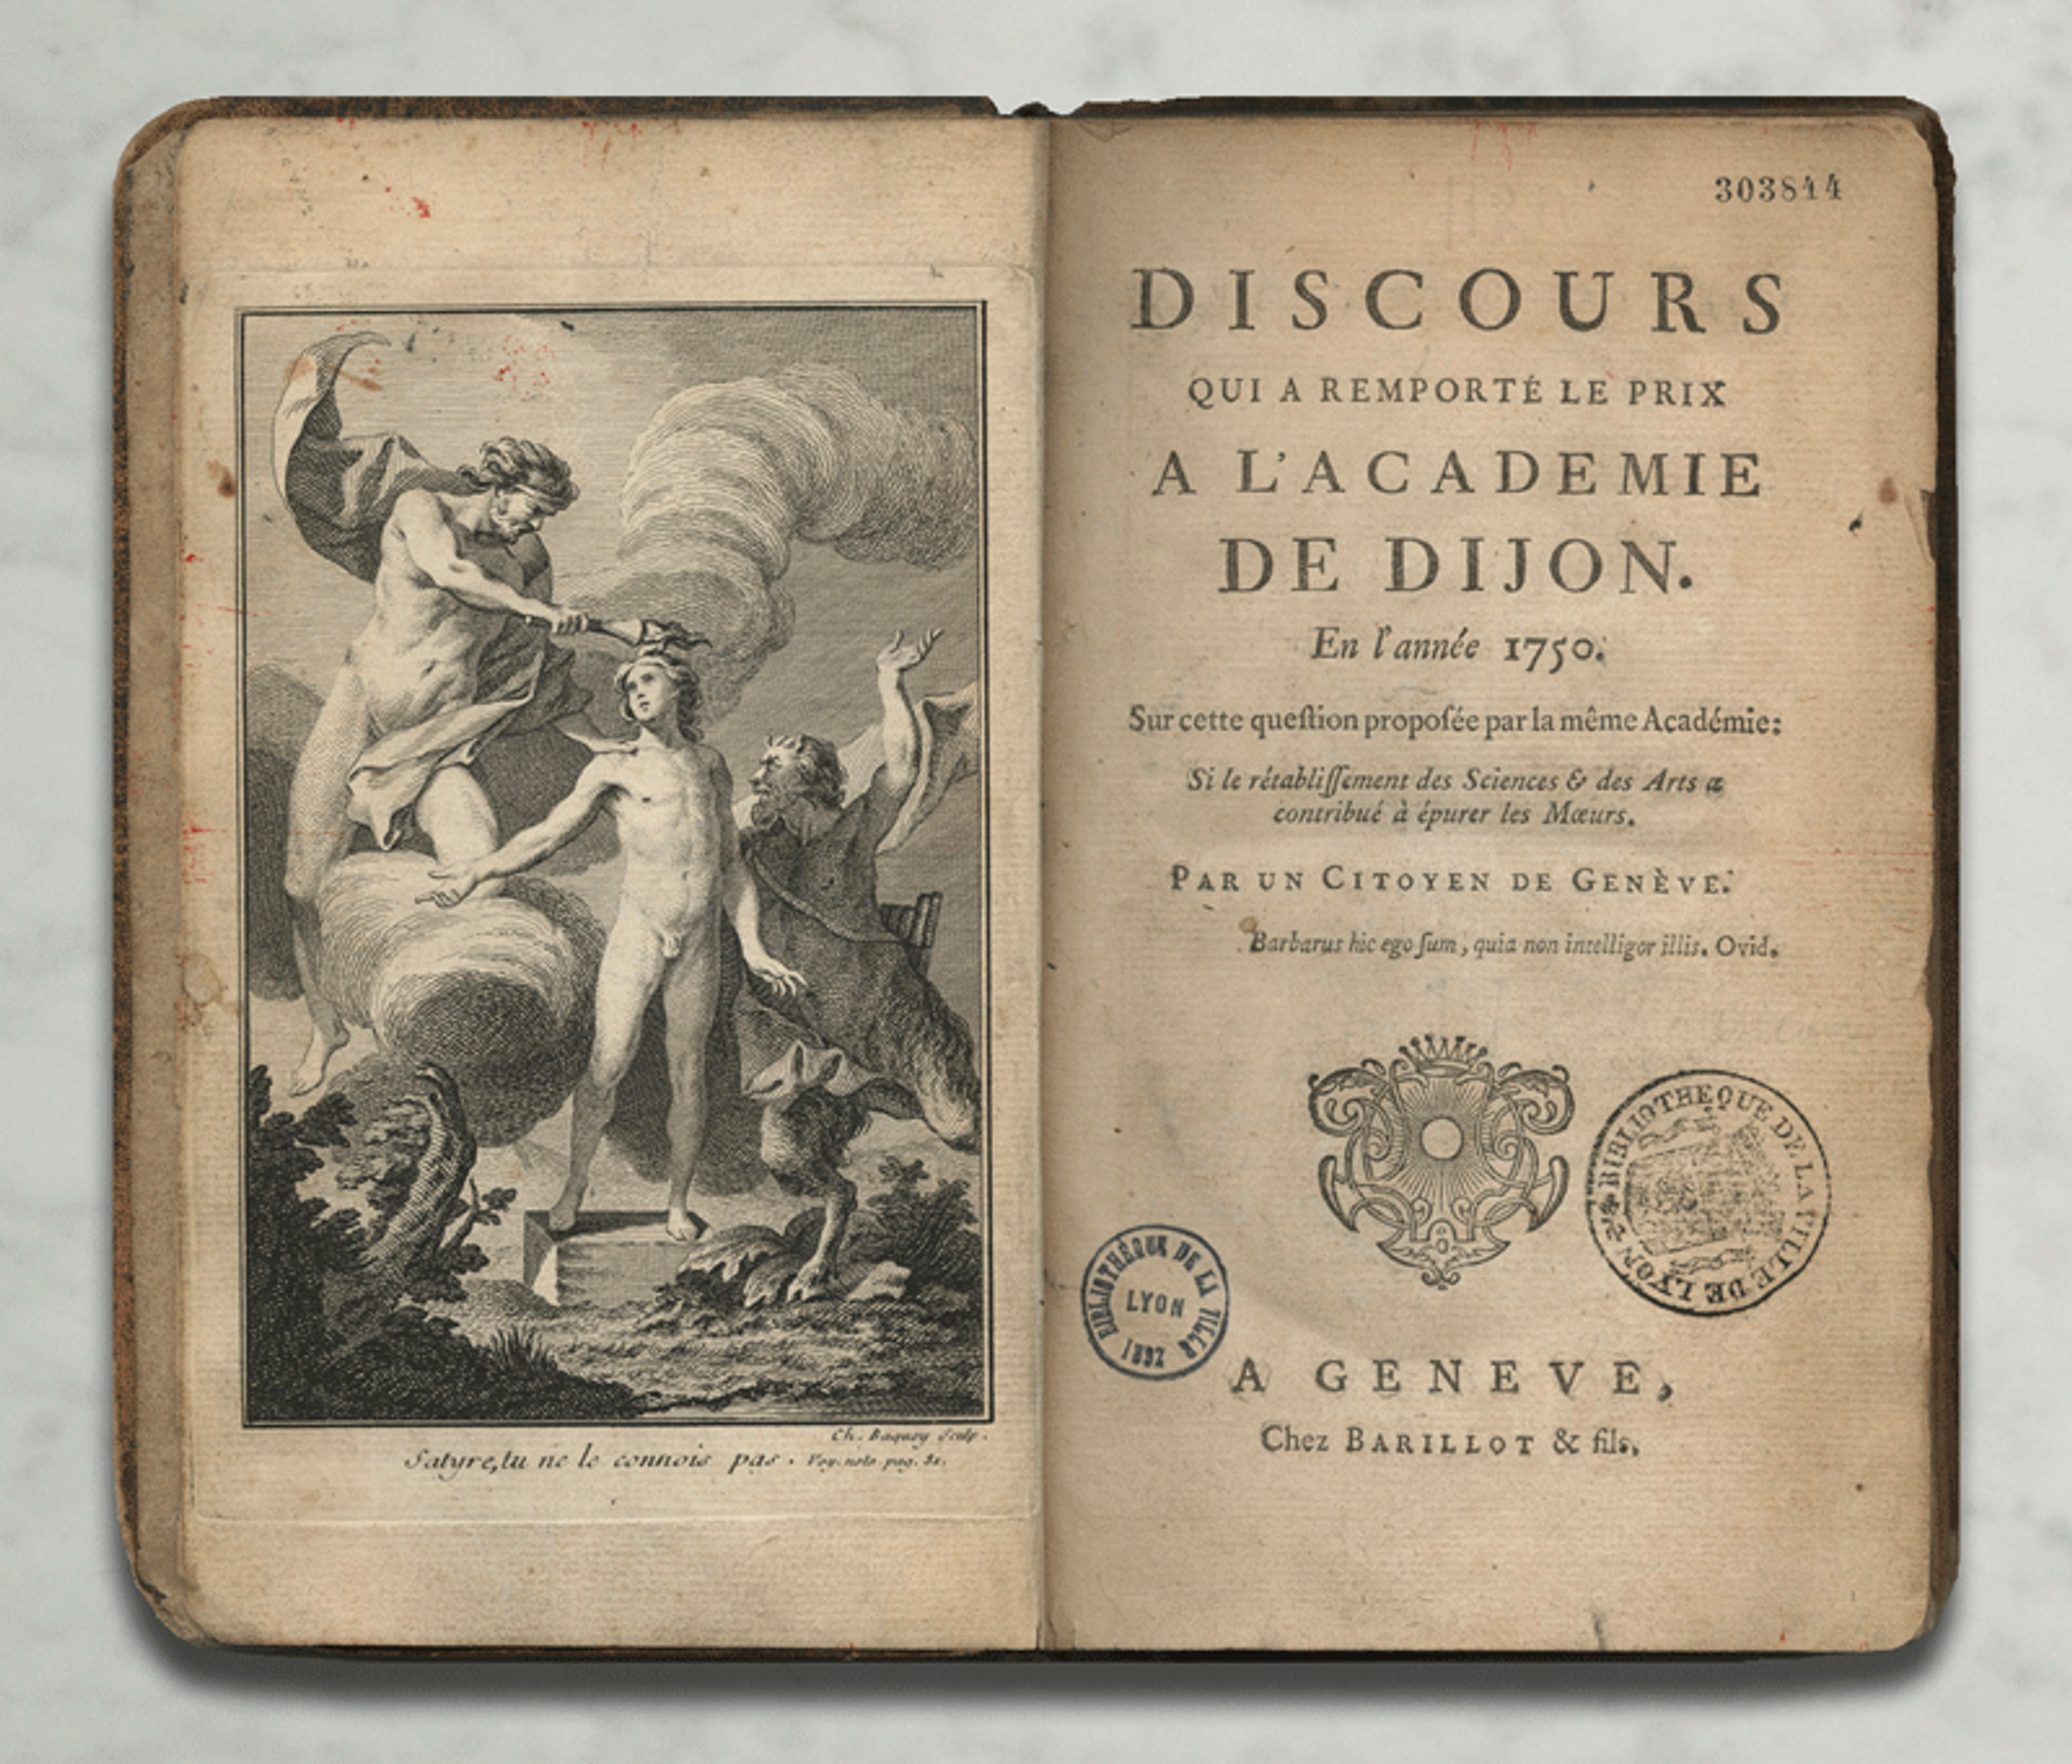 Image of Jean-Jacques Rousseau's essay Discourse on the Arts and Sciences